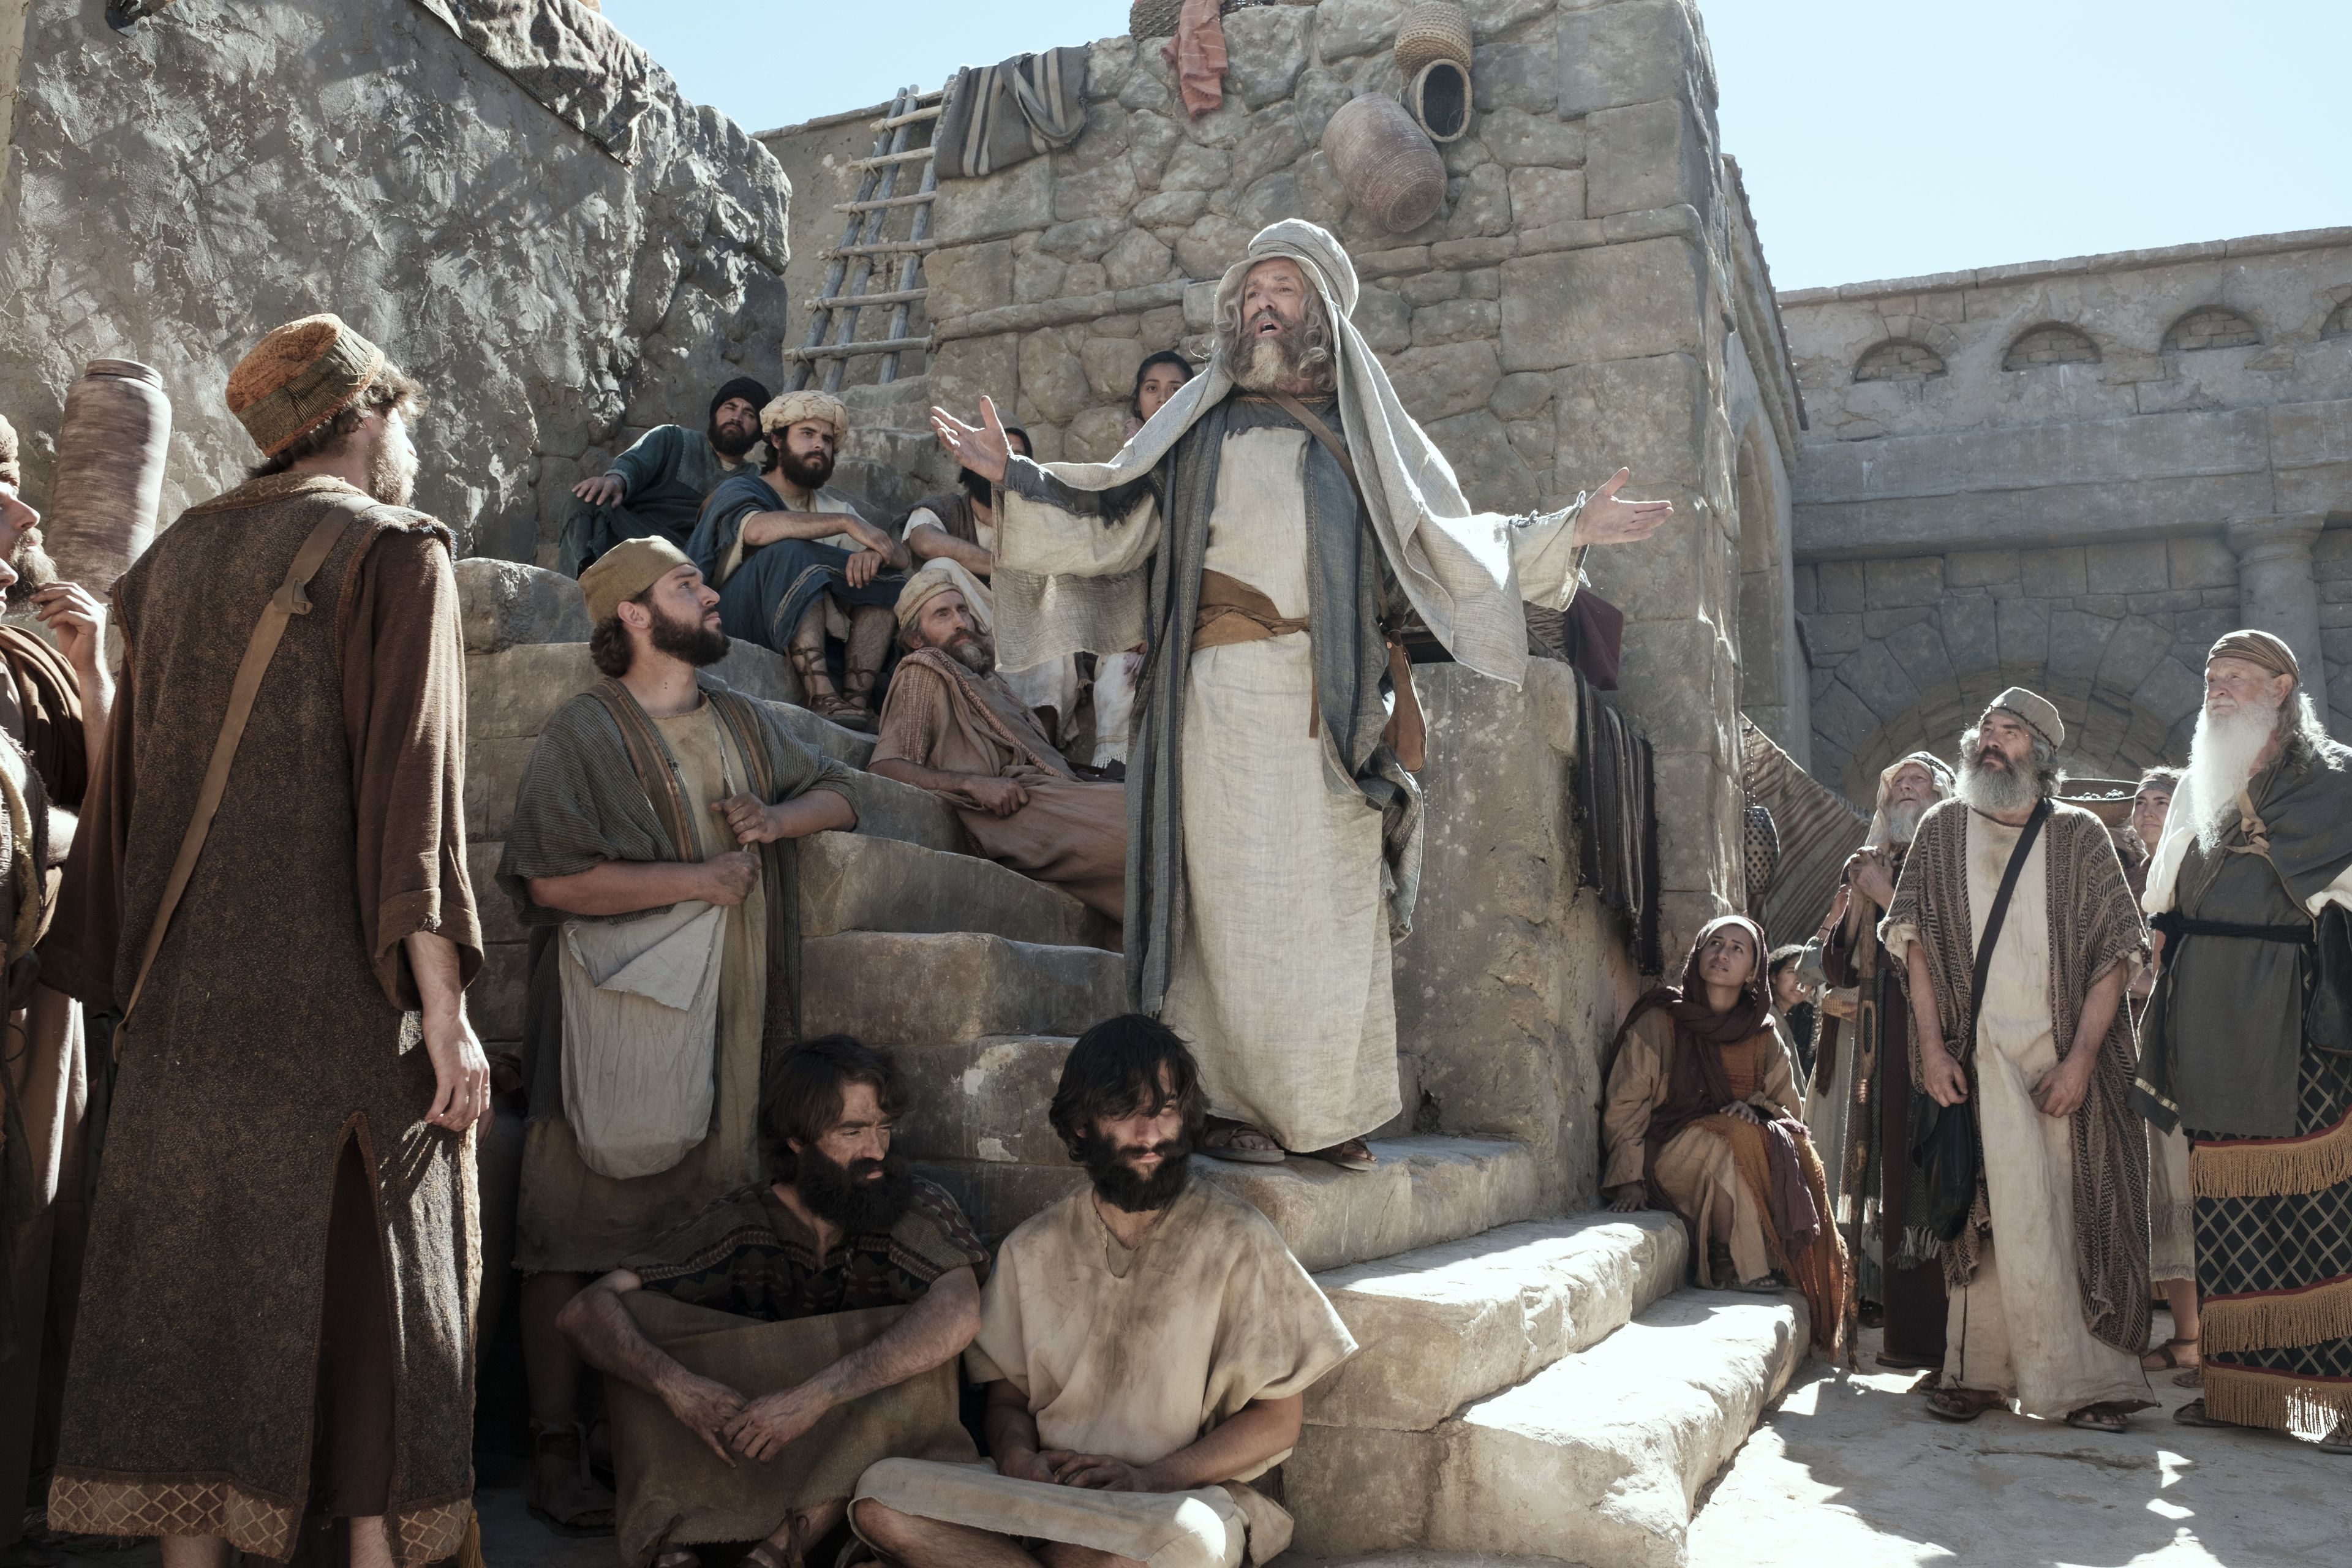 Lehi preaches to a crowd in Jerusalem.